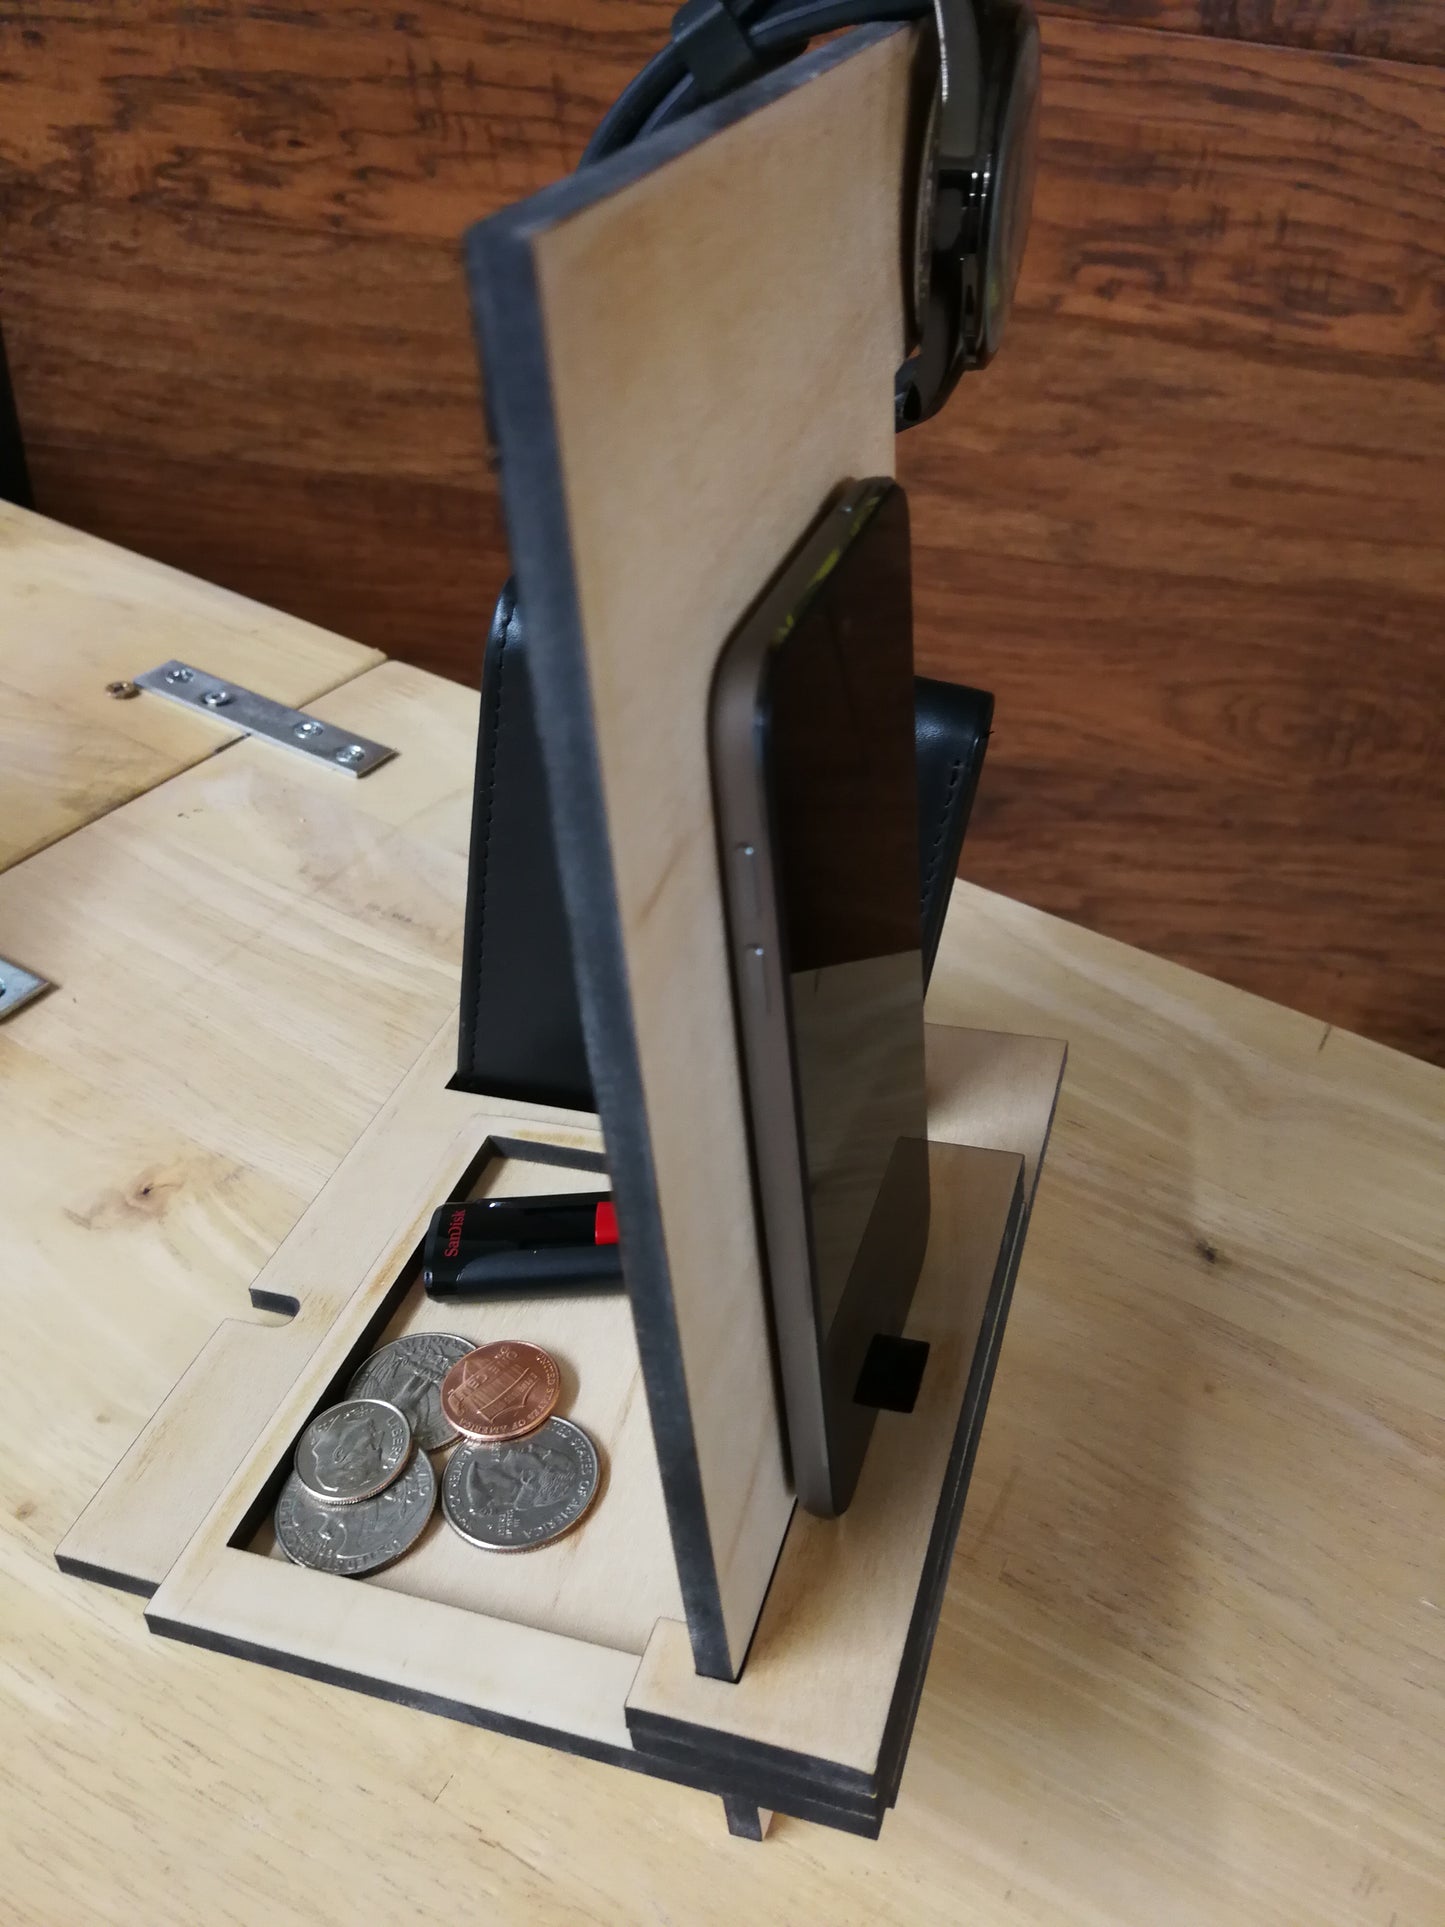 Interchangeable Phone Stand